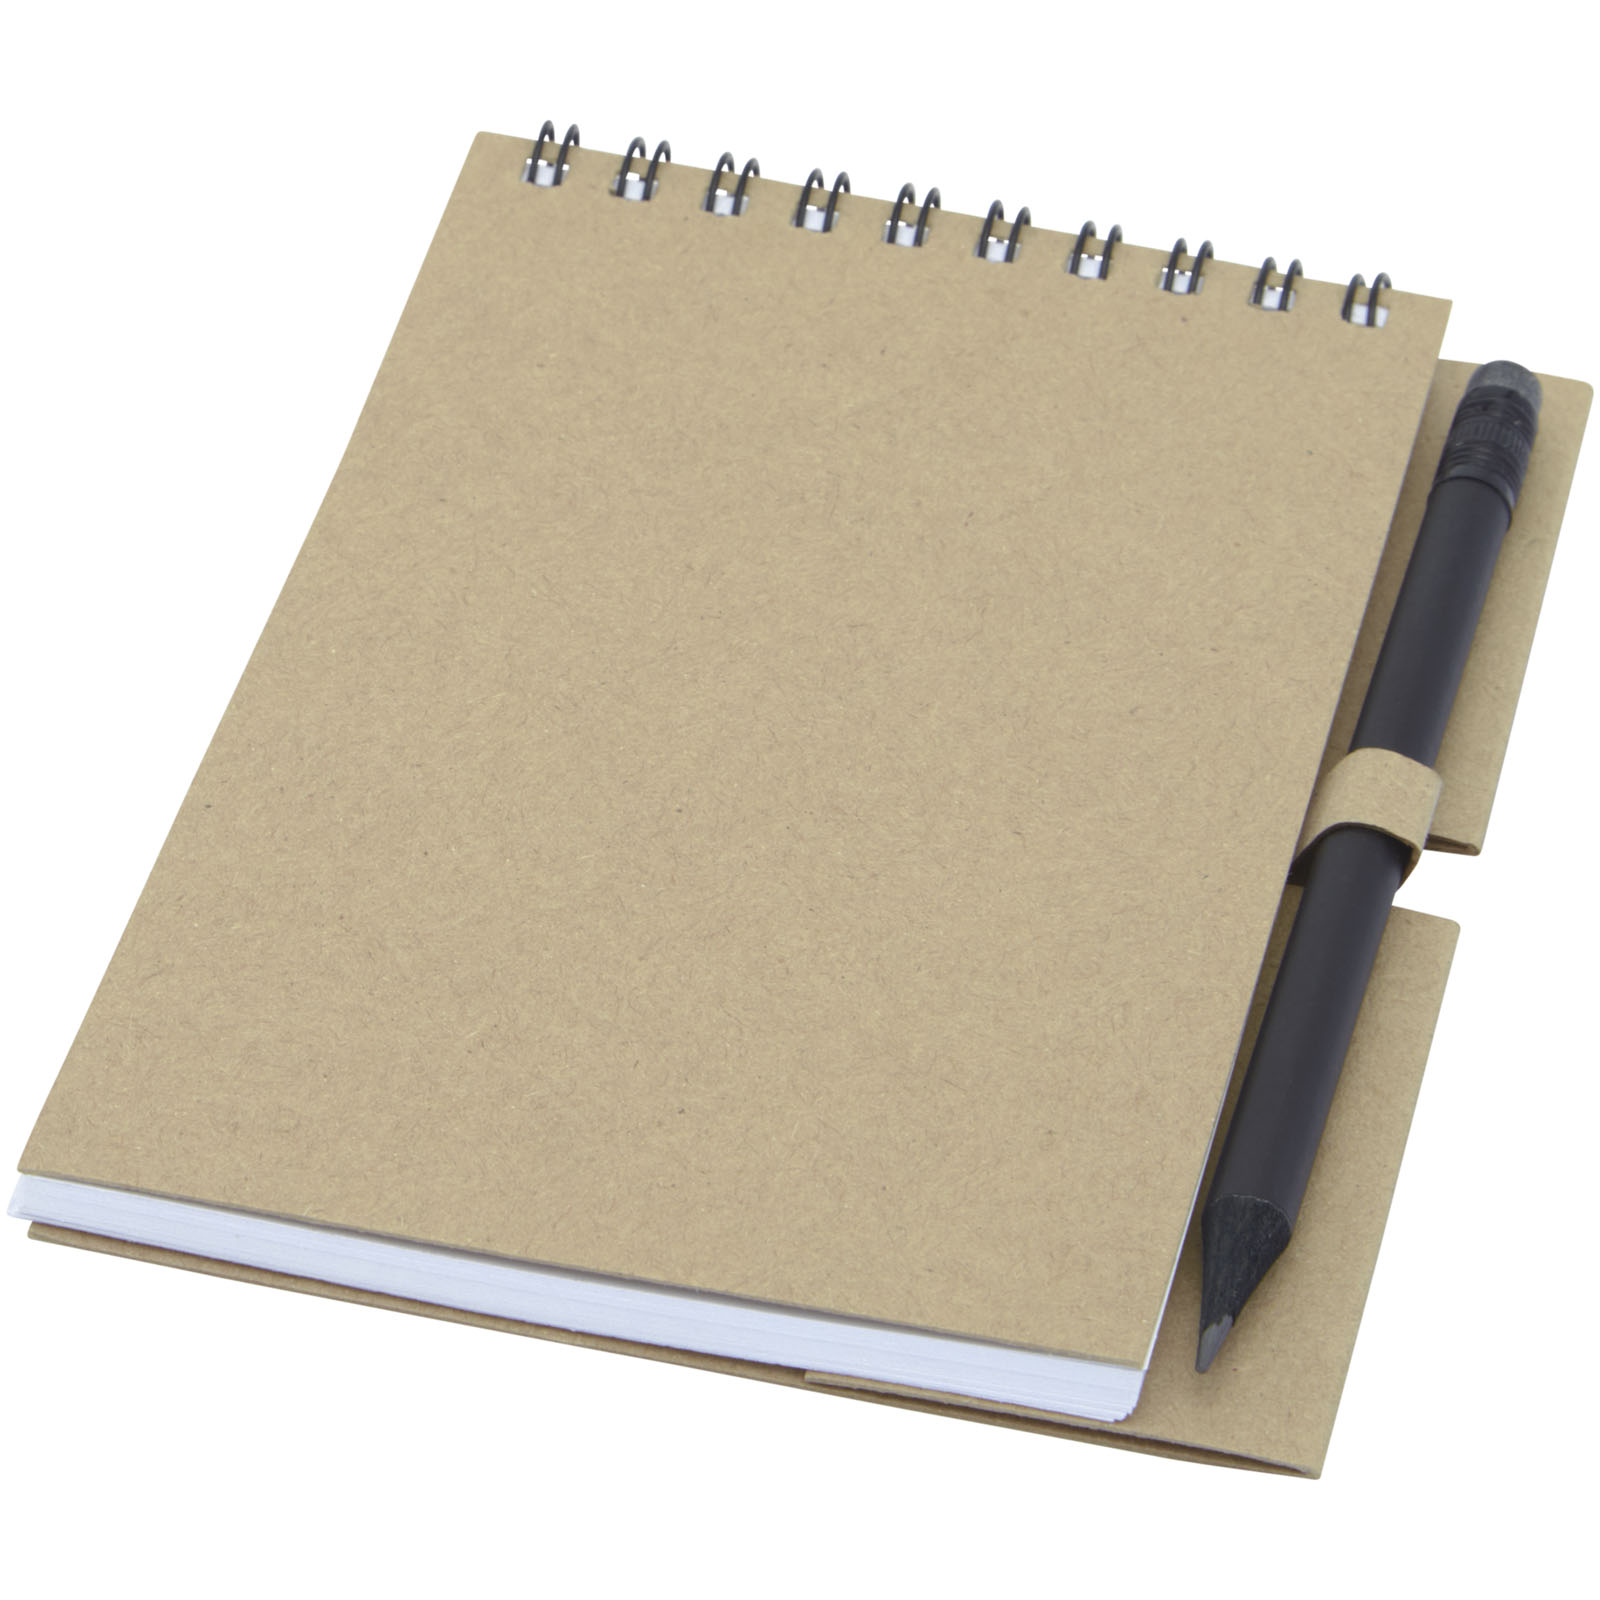 Notebooks - Luciano Eco wire notebook with pencil - small